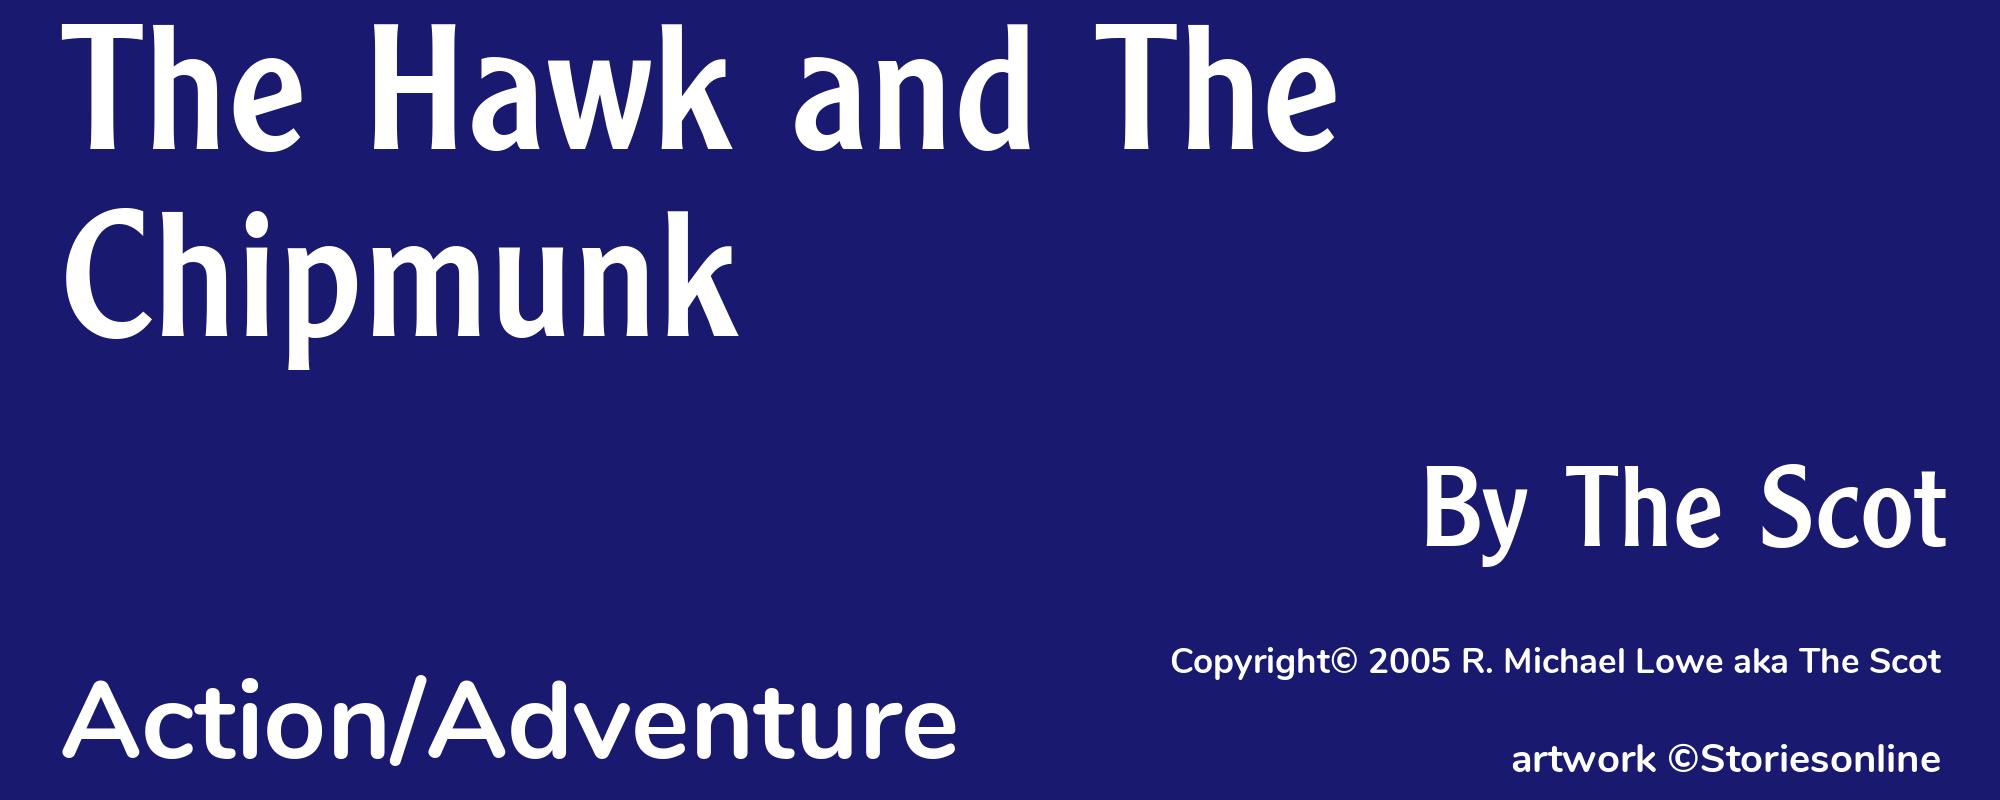 The Hawk and The Chipmunk - Cover